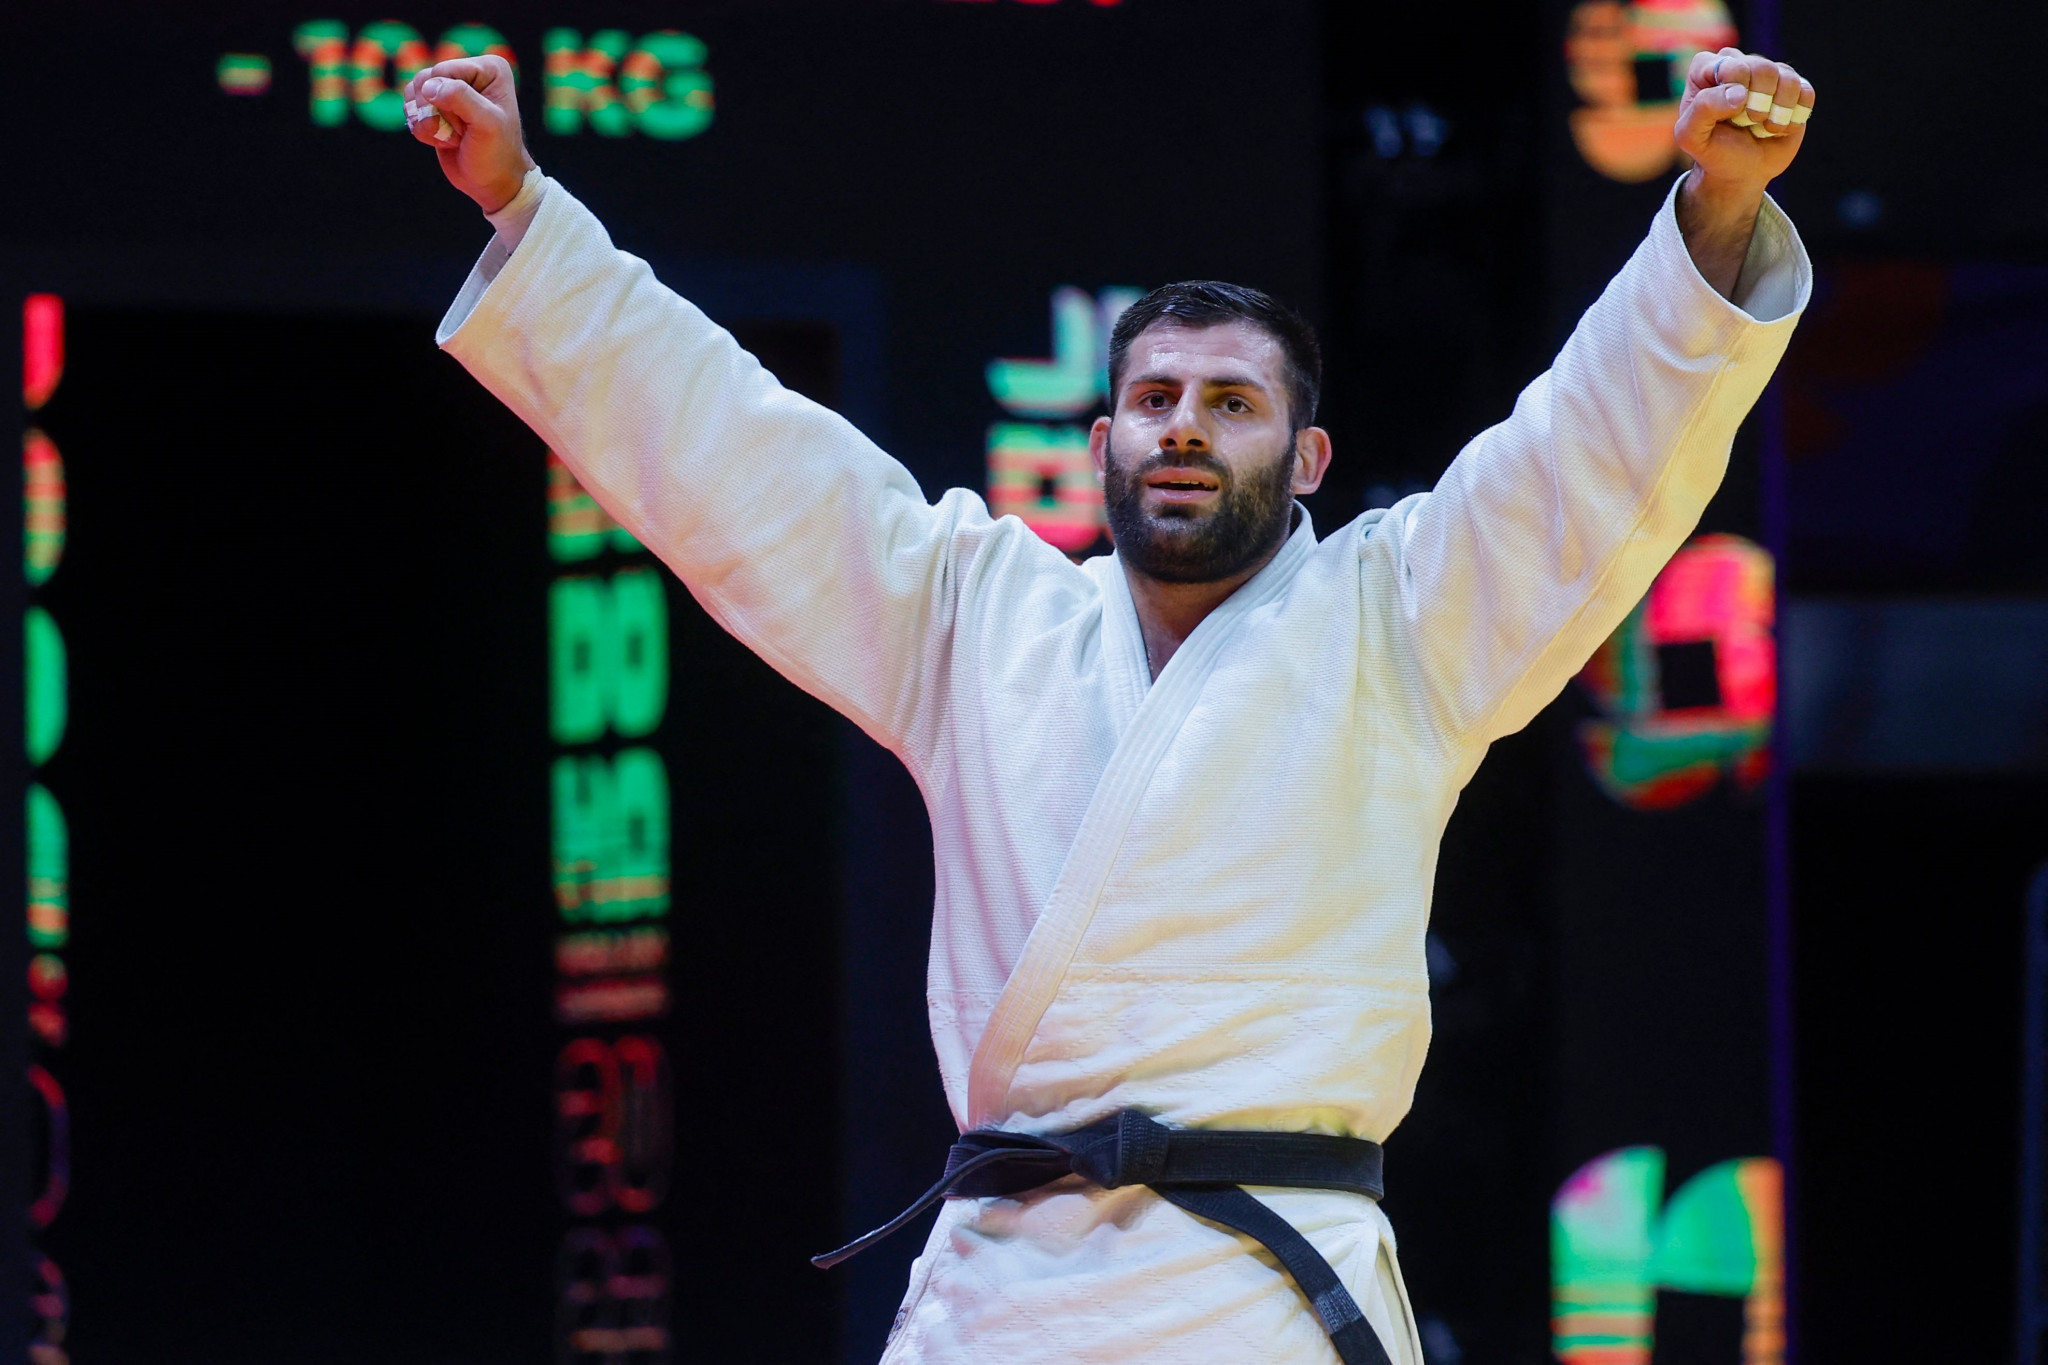 Adamian becomes first Russian to win world judo gold as neutral at Doha 2023